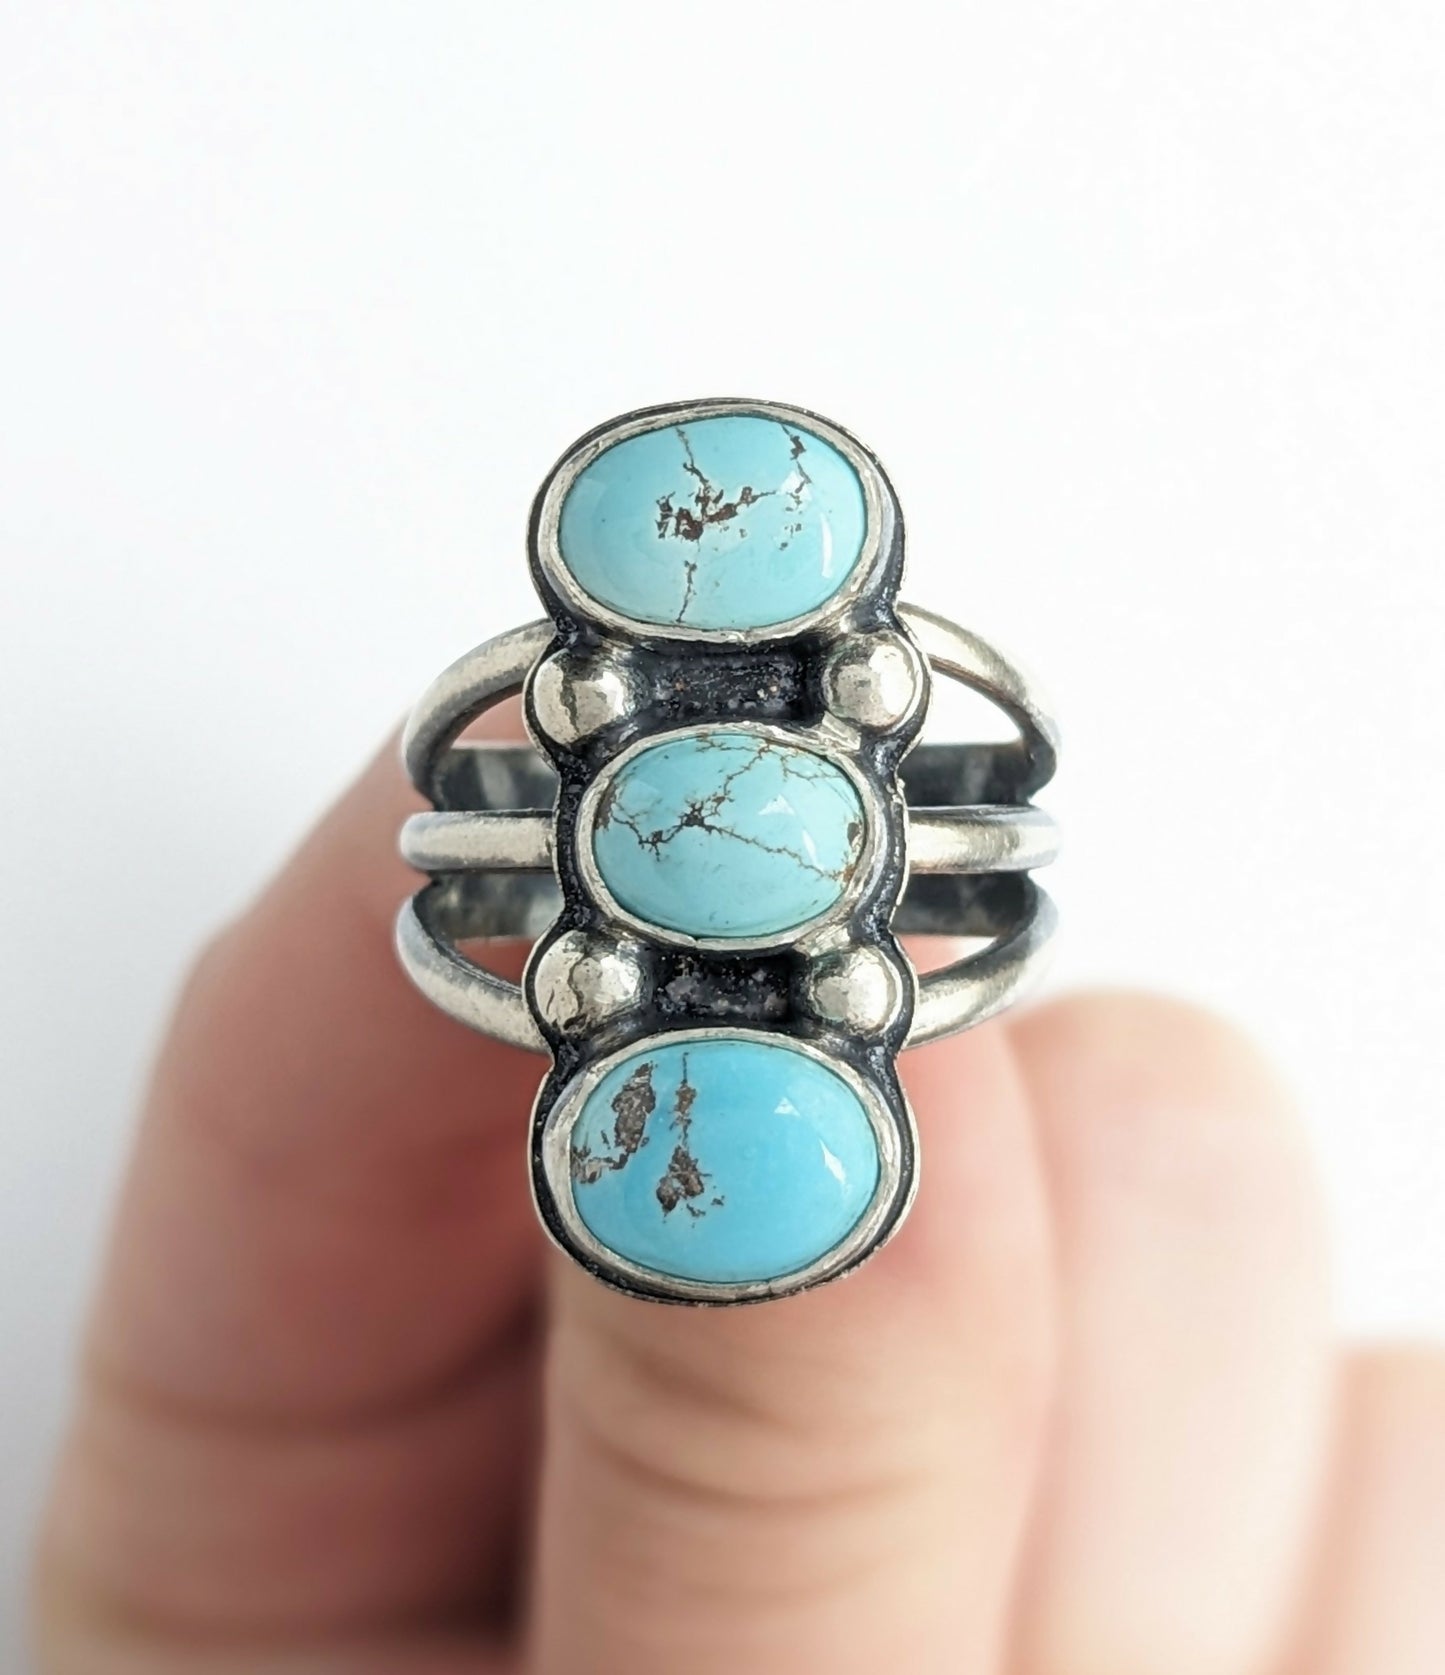 Triple Turquoise Ring In Size 8